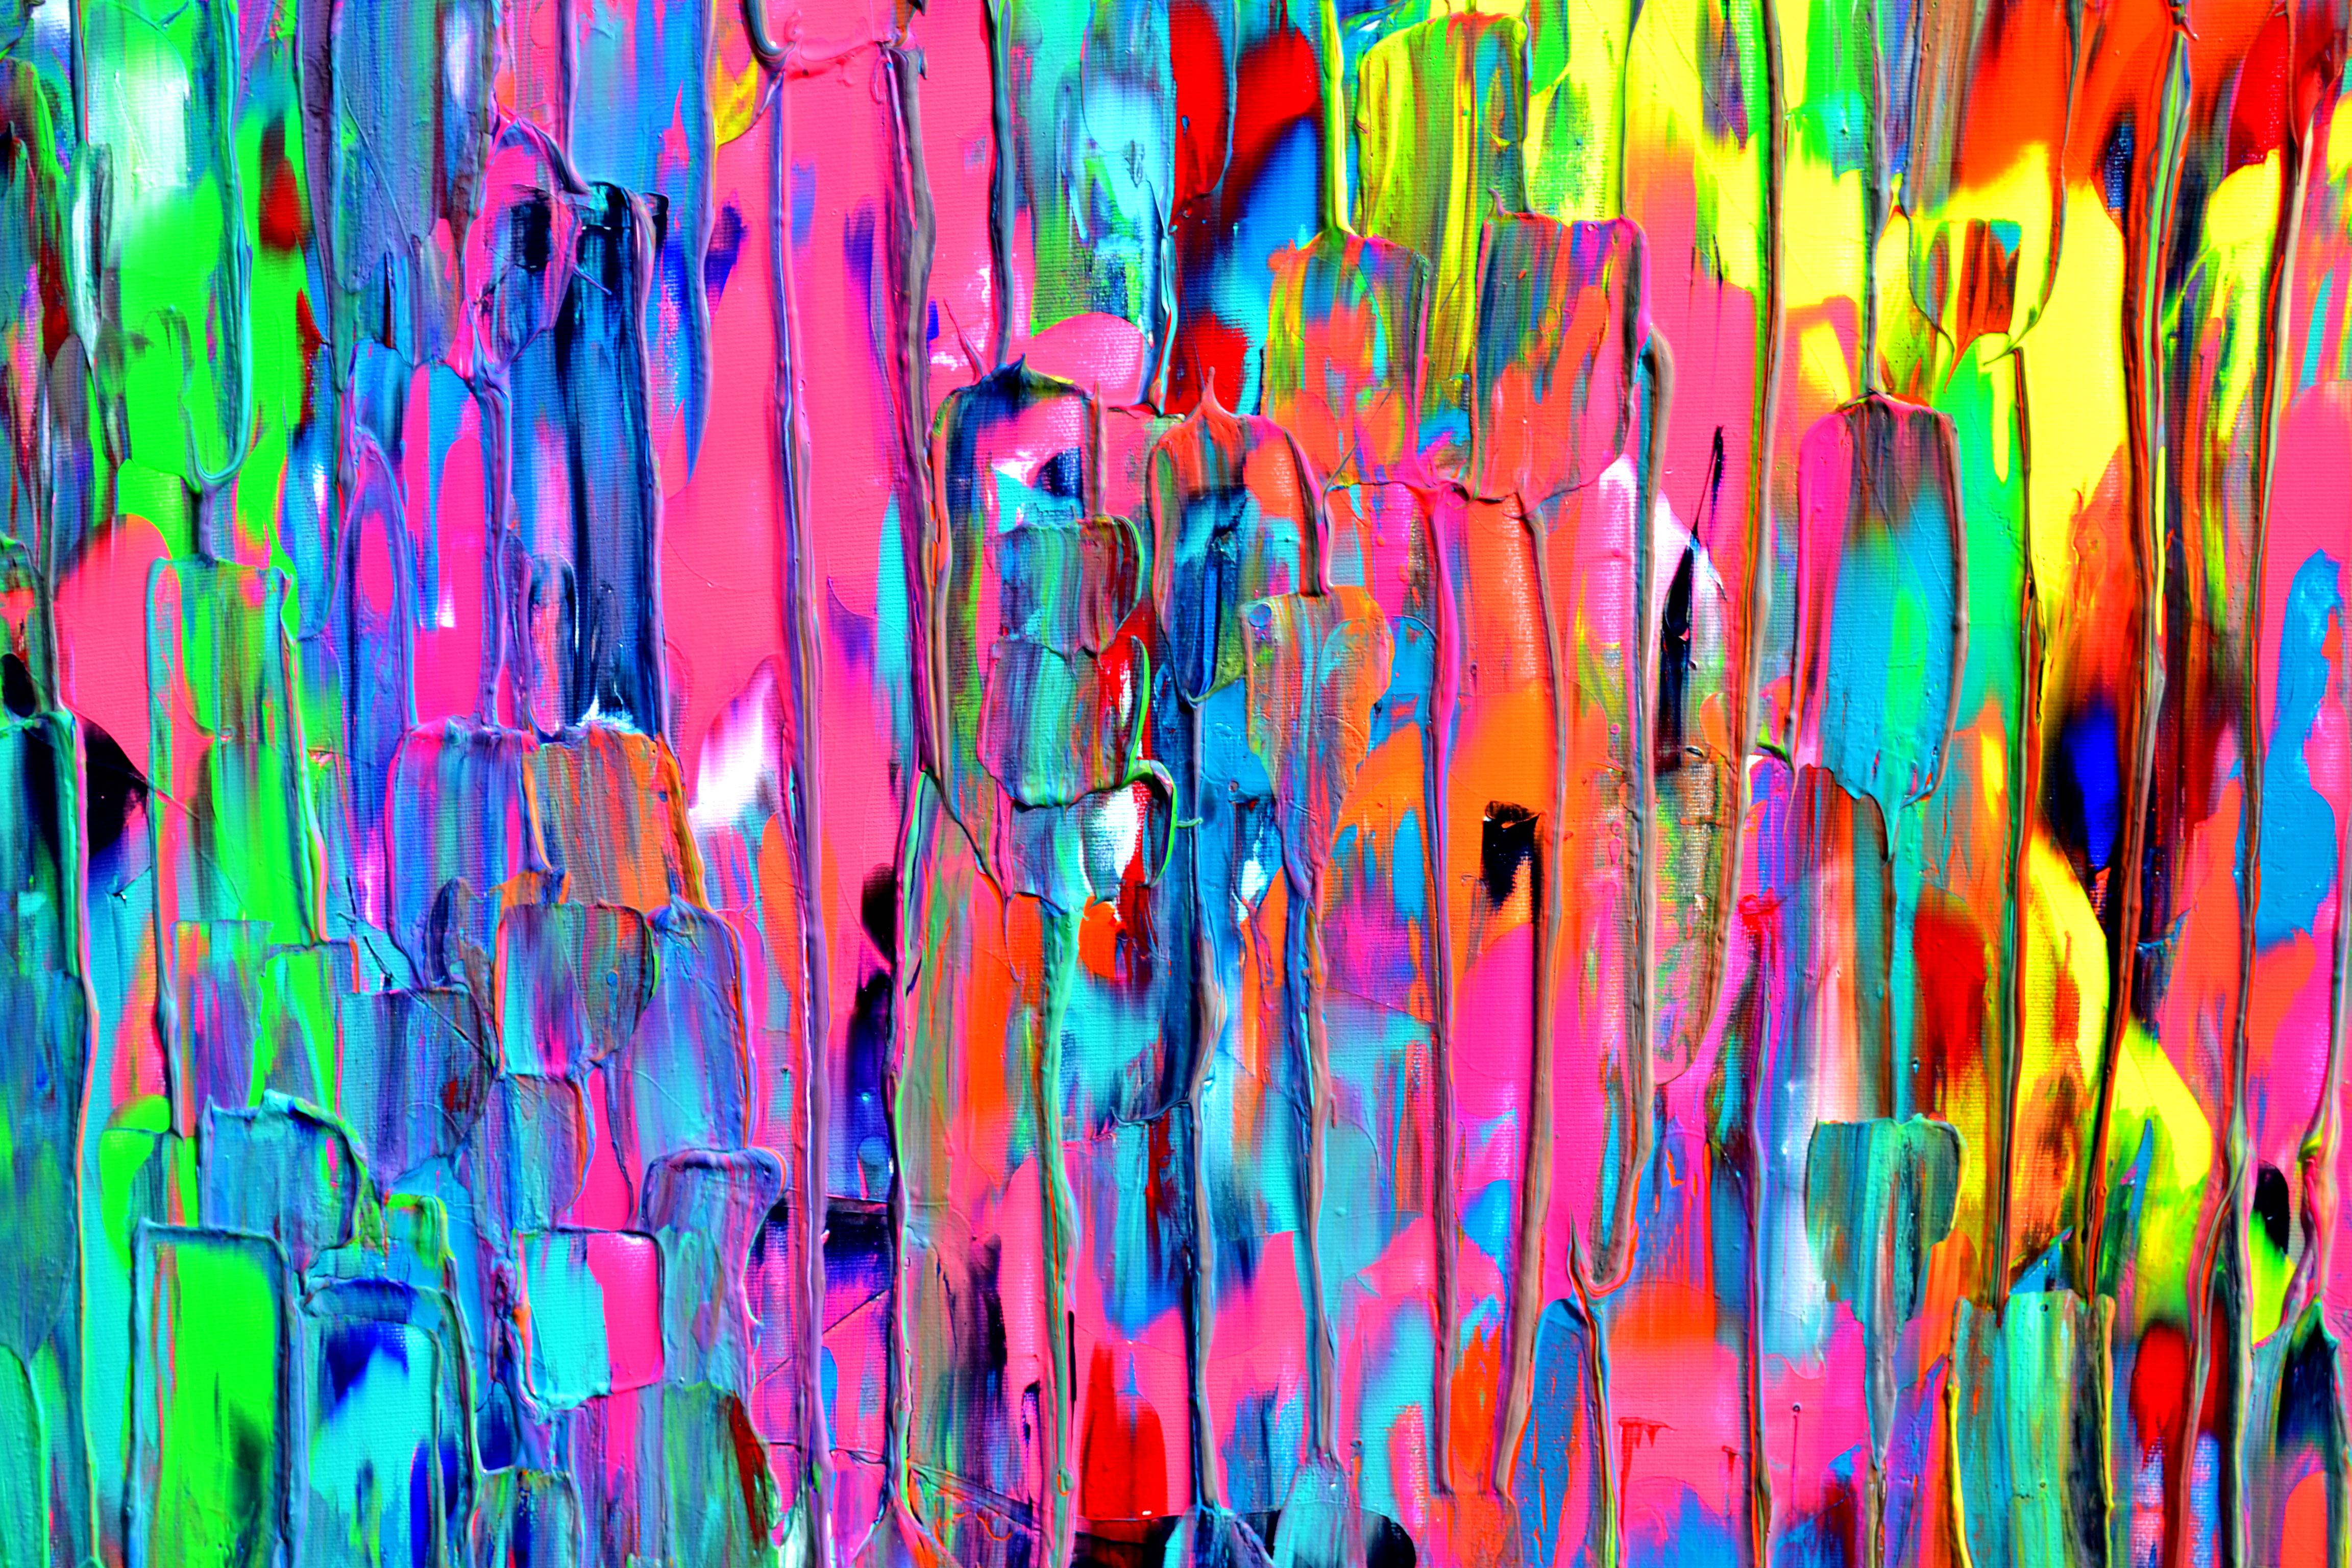 A very beautiful large colorful abstract painting with many neon nuances, havy textured, vibrant and emotional.
READY TO HANG - GALLERY QUALITY
It's all about colors happiness and freedom!
Dimensions: 180x100X4 cm - 70.86x39.4x1.6 inches.
Some neon